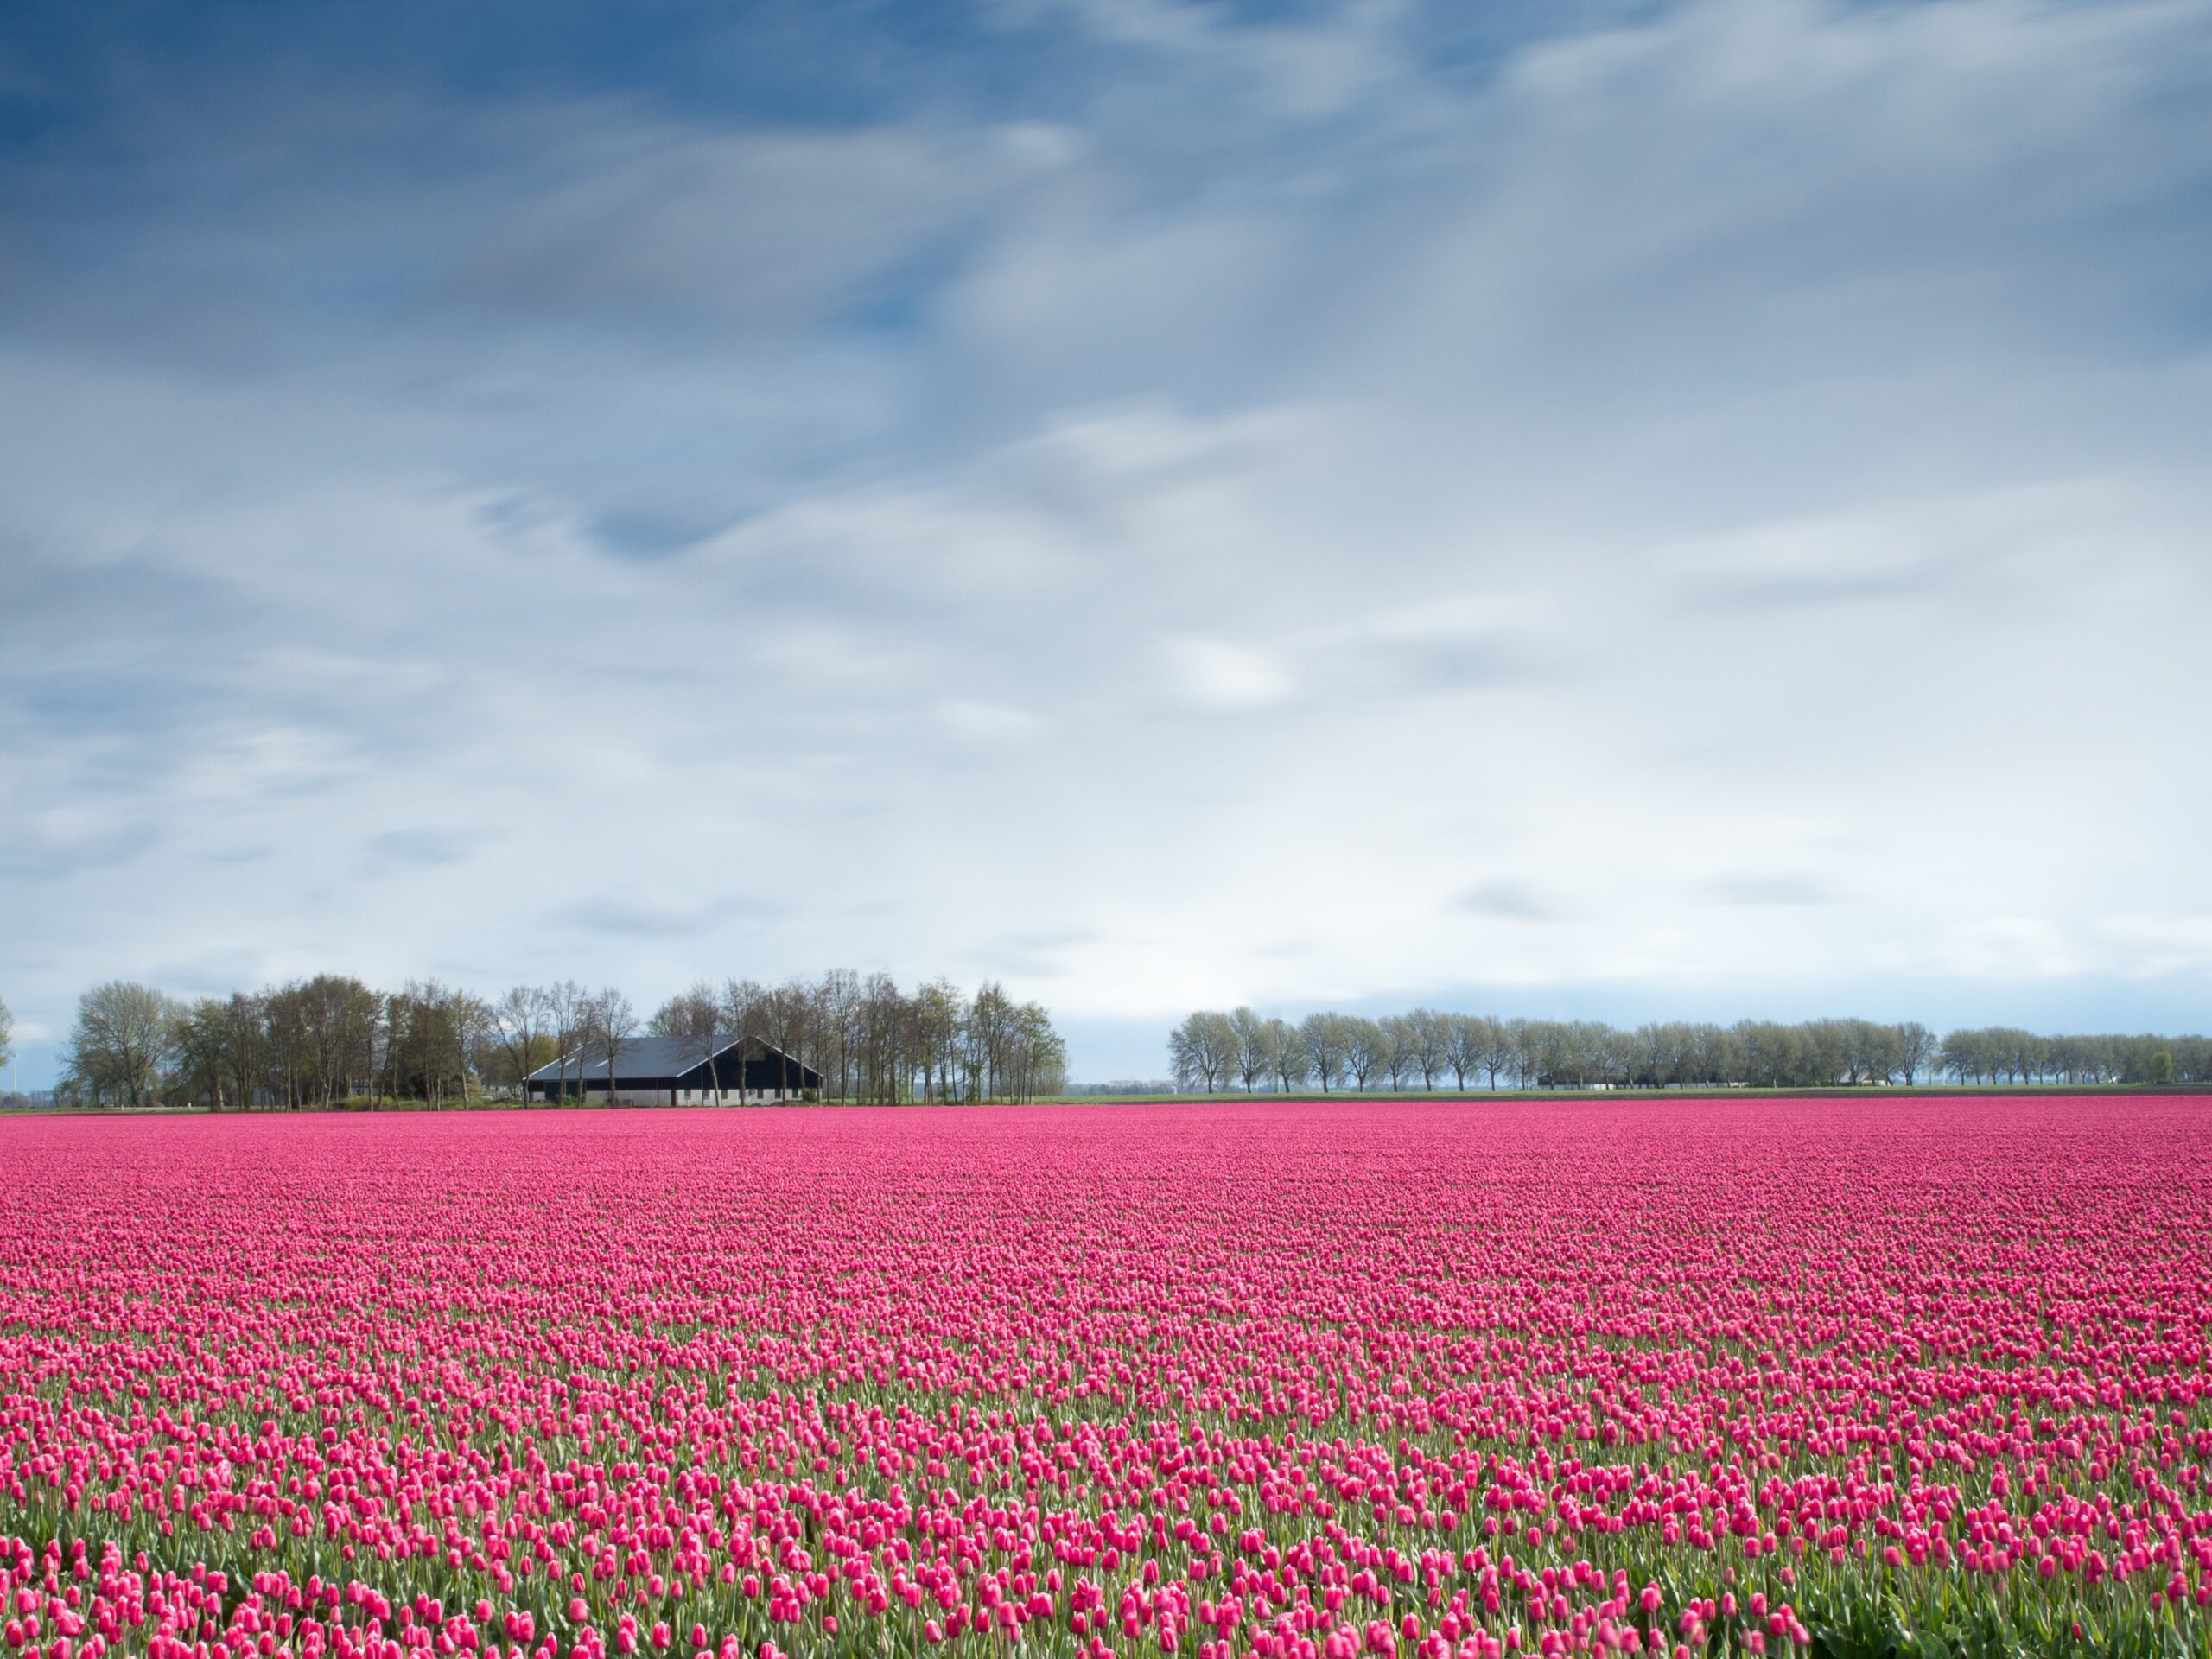 Landscape of a field of flowers in the Netherlands